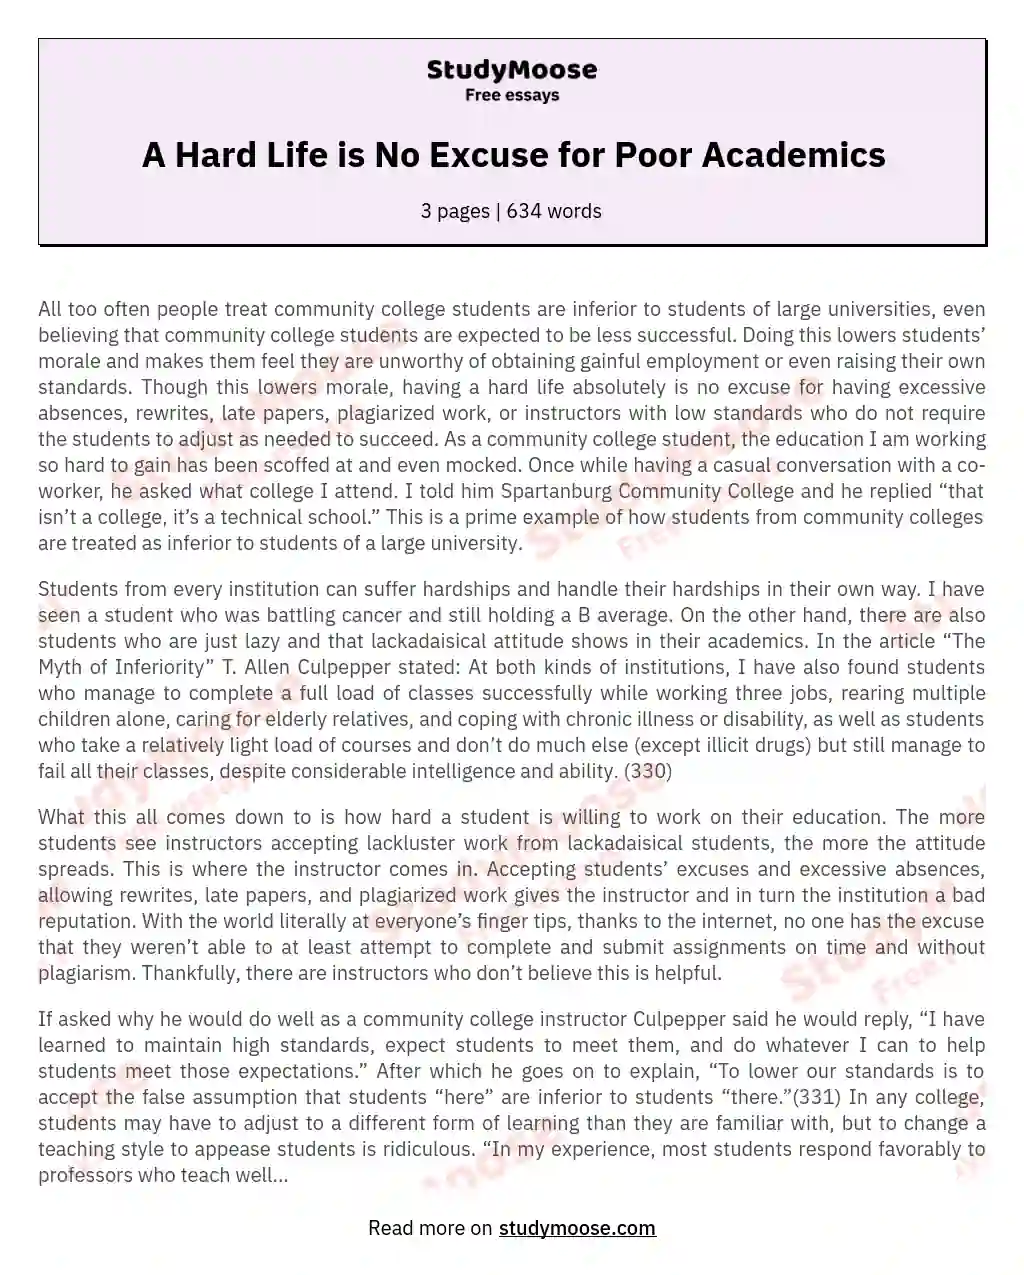 A Hard Life is No Excuse for Poor Academics essay